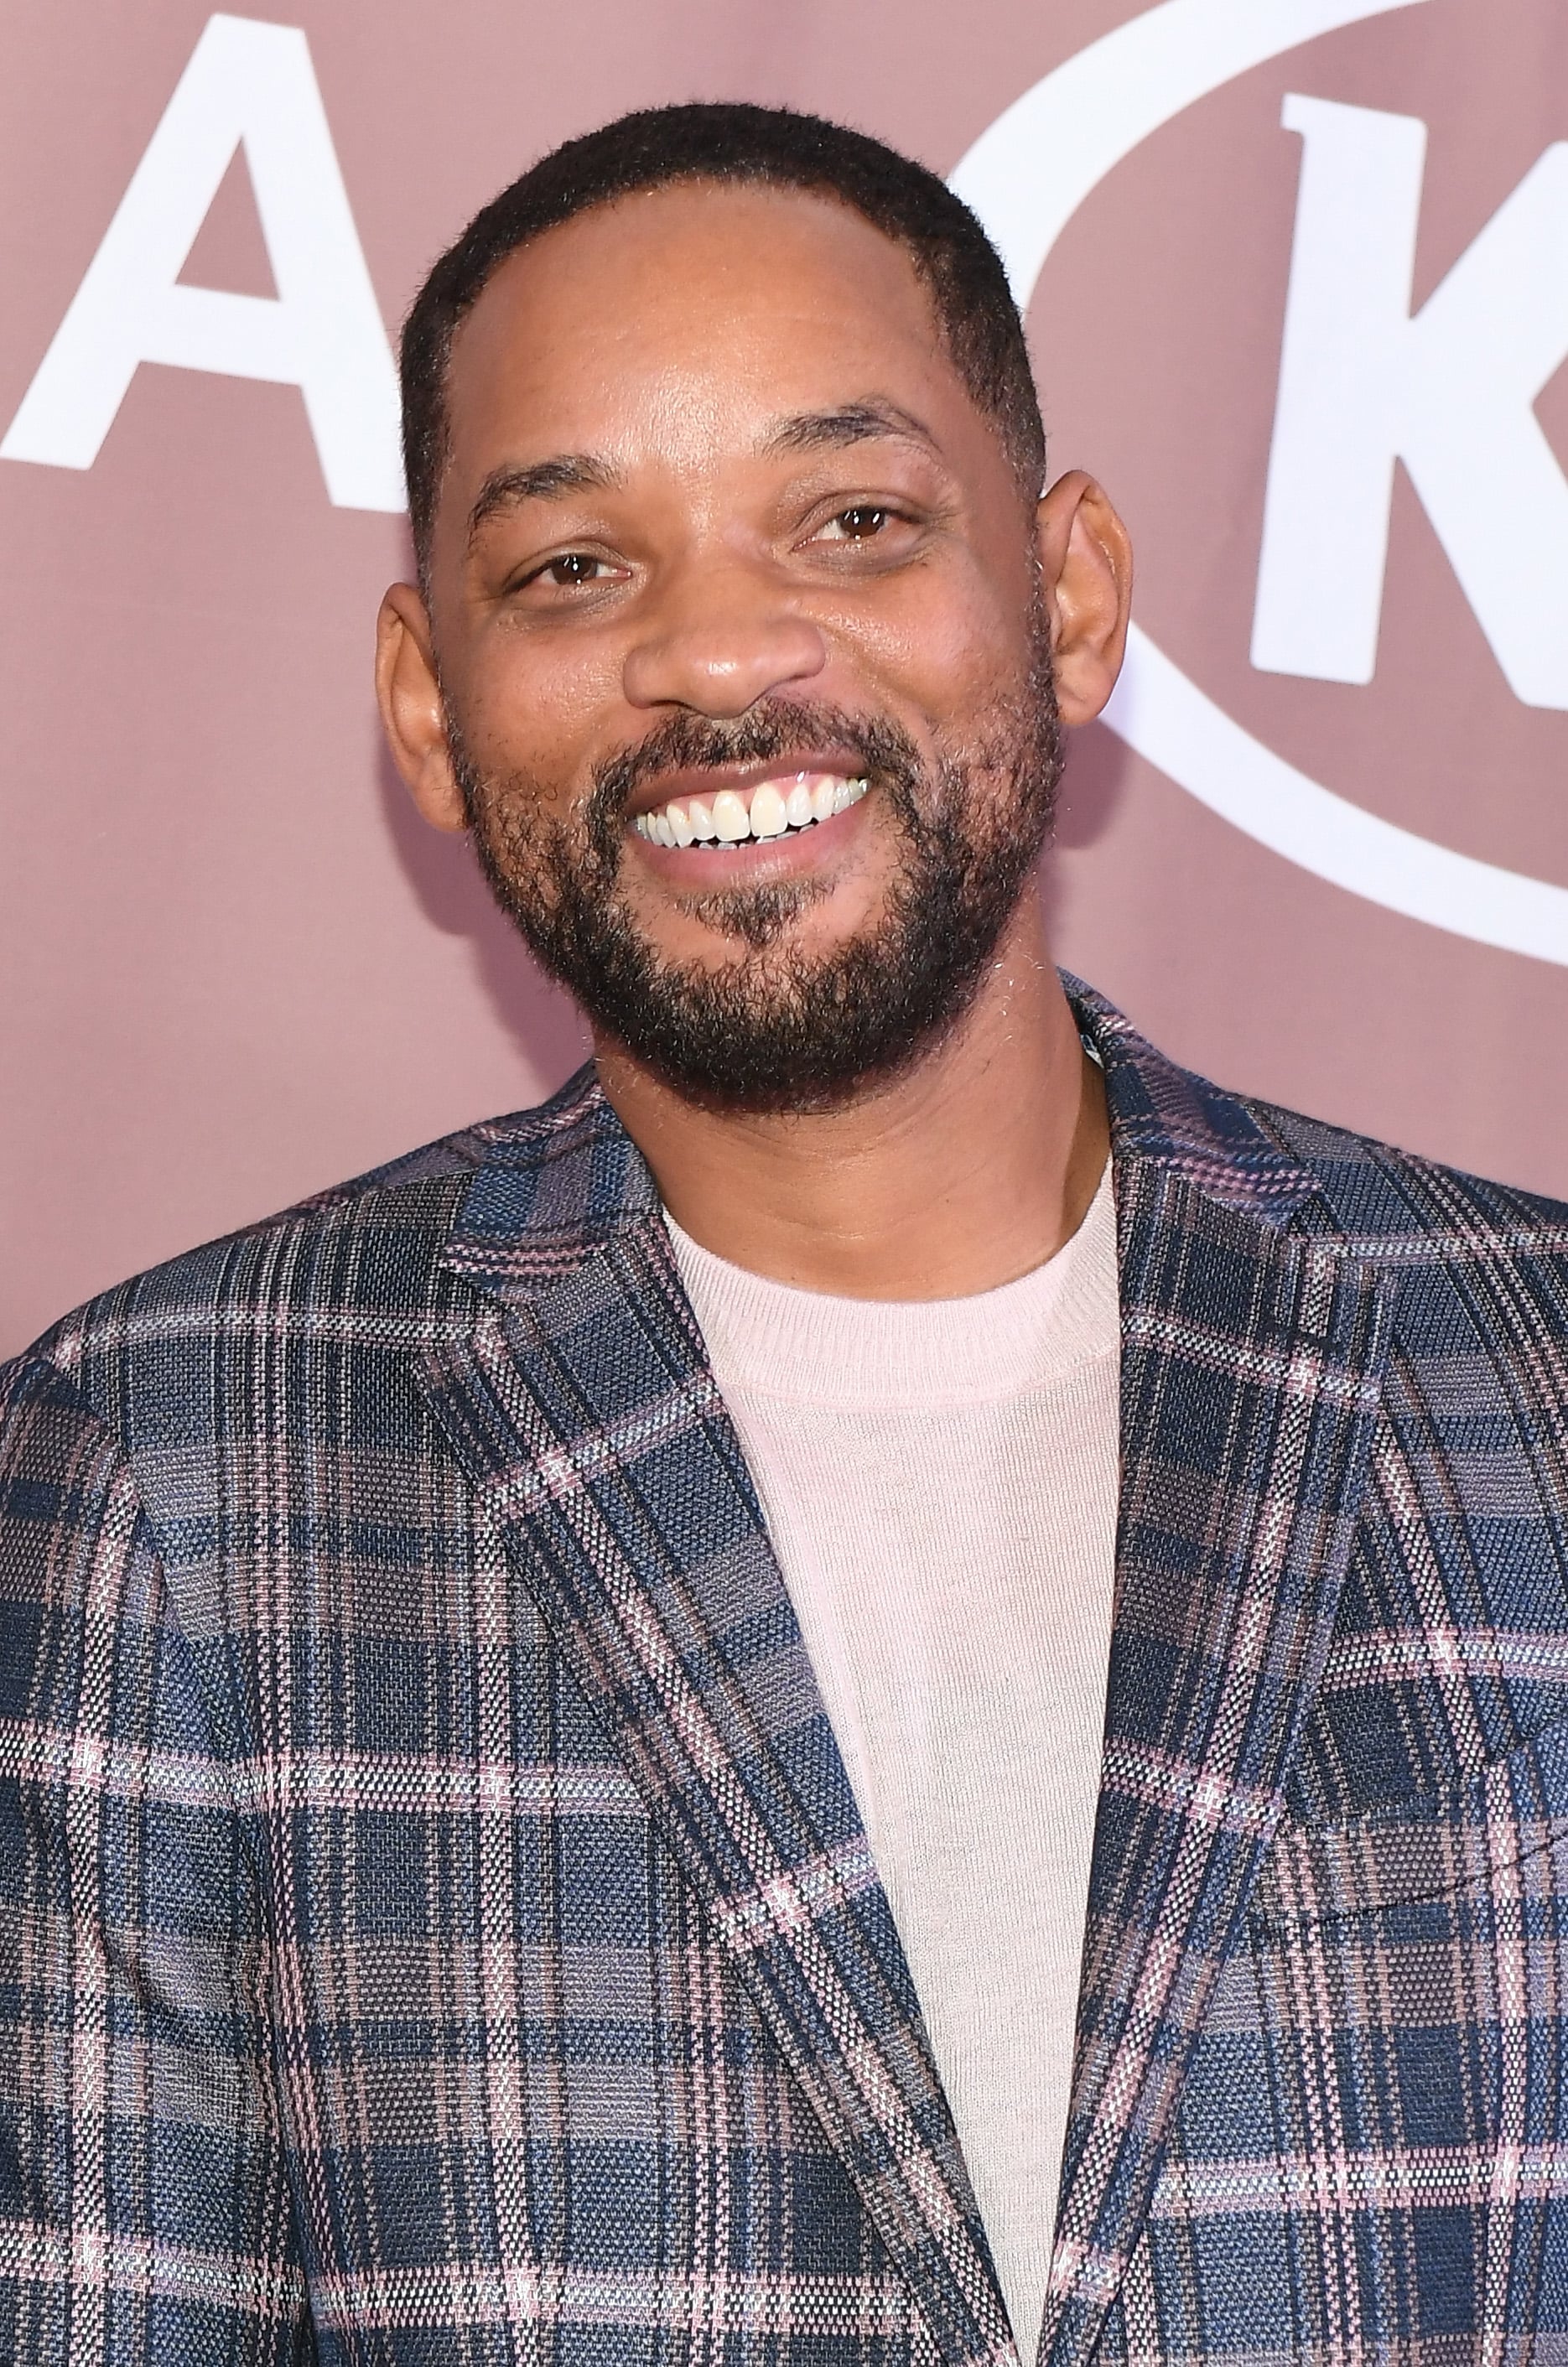 Detail Foto Will Smith Nomer 27